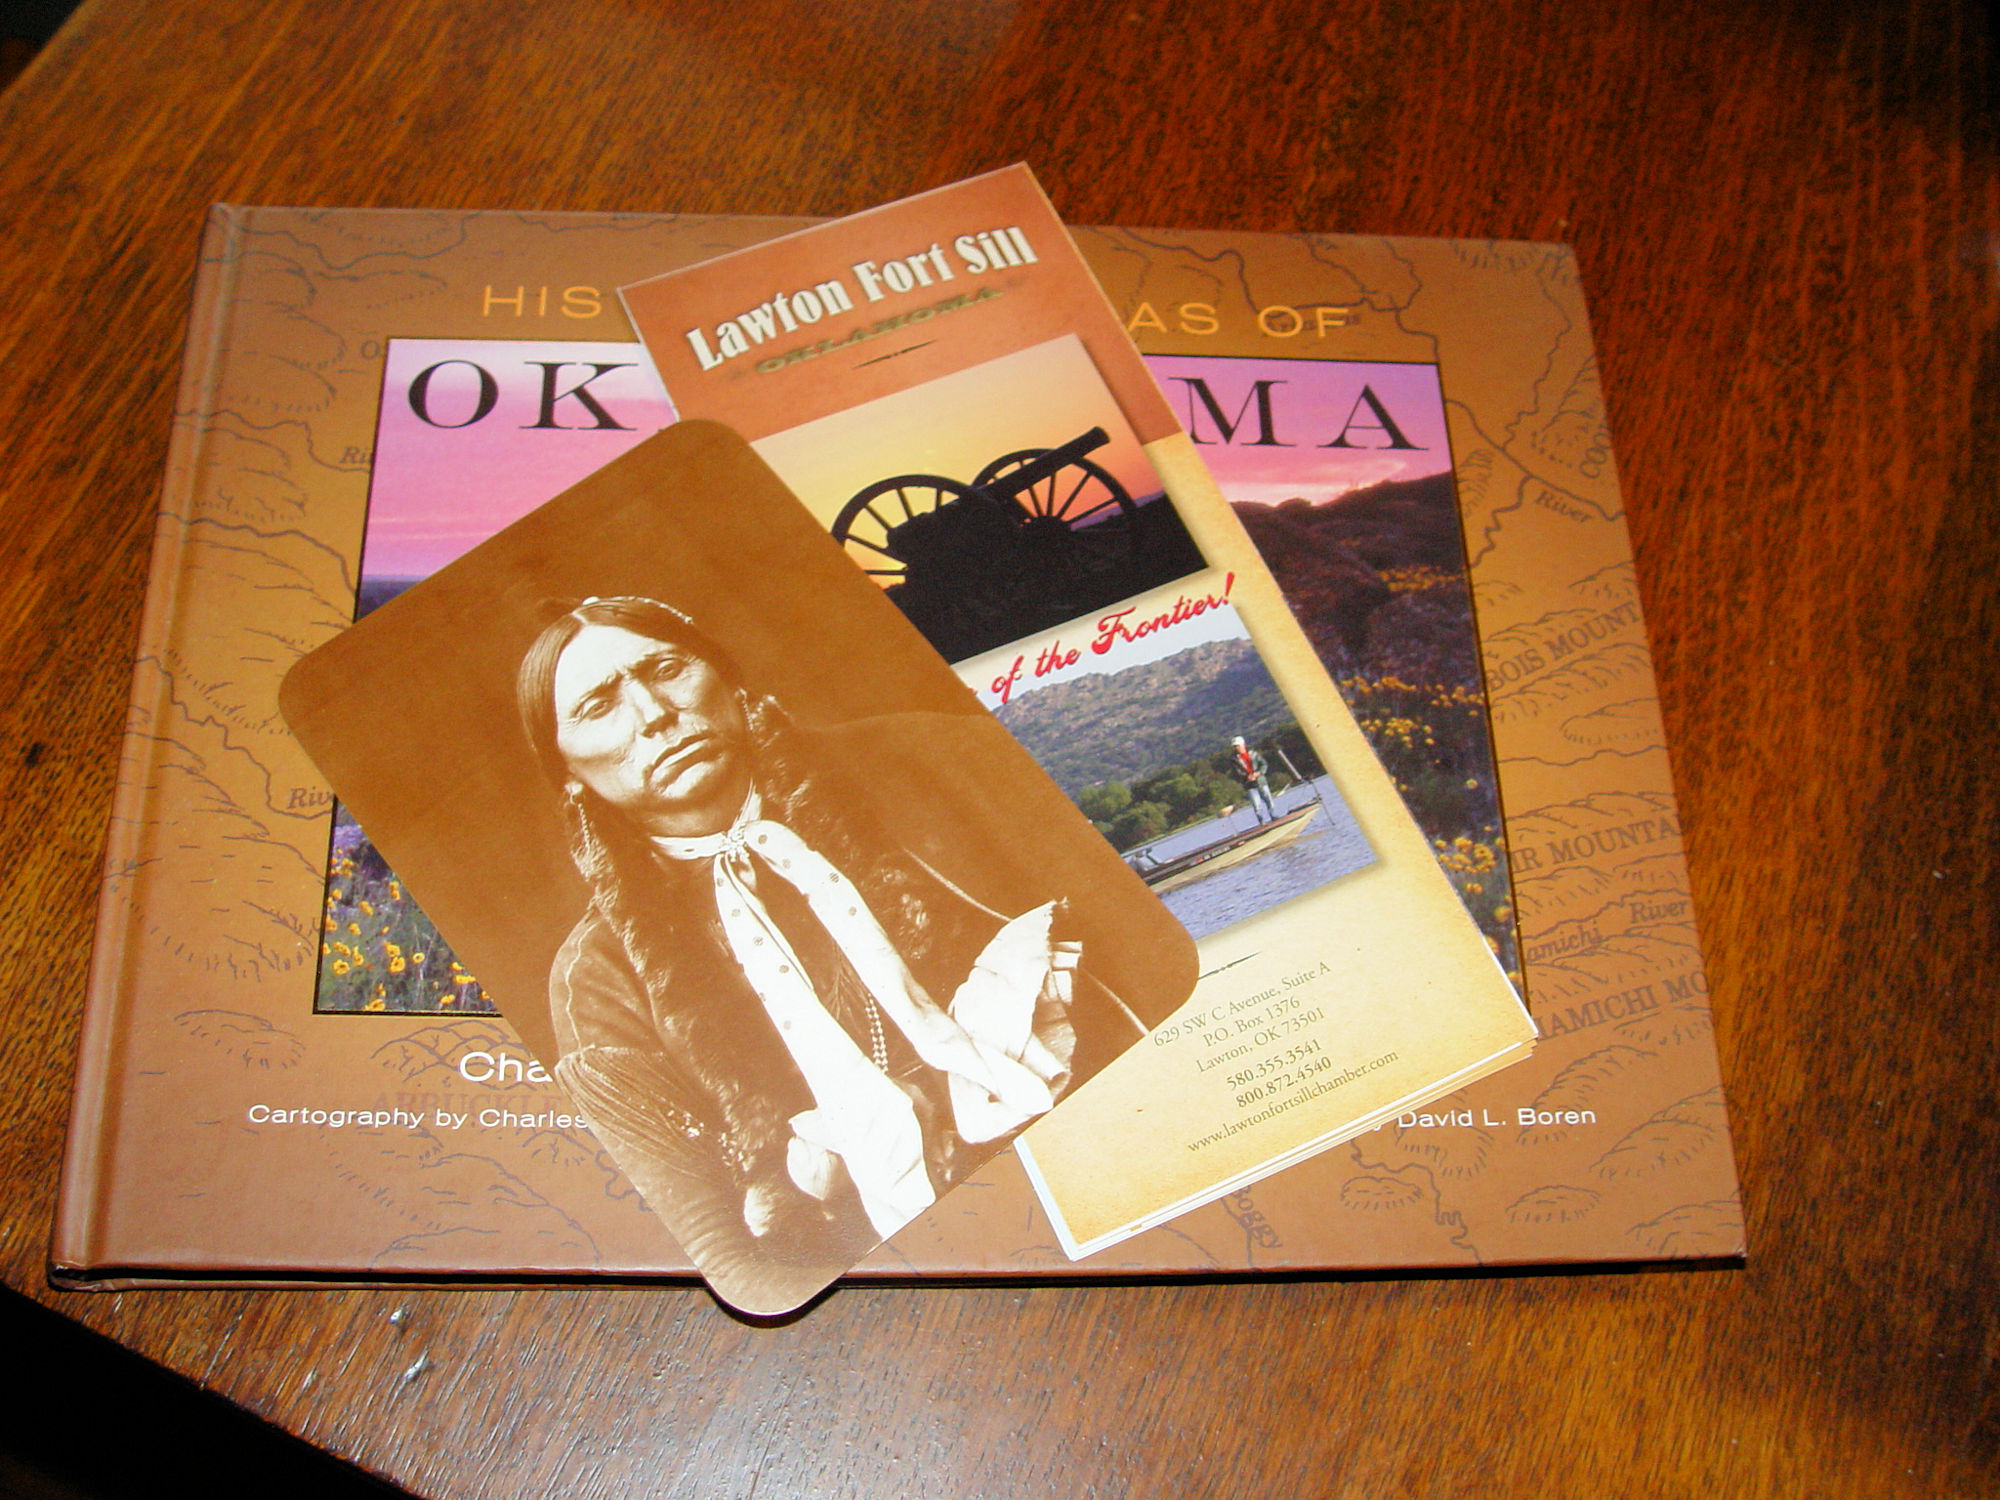 Historical Atlas of Oklahoma by Goins &
                        Goble + Quanah Parker PC, Lawton Fort Sill